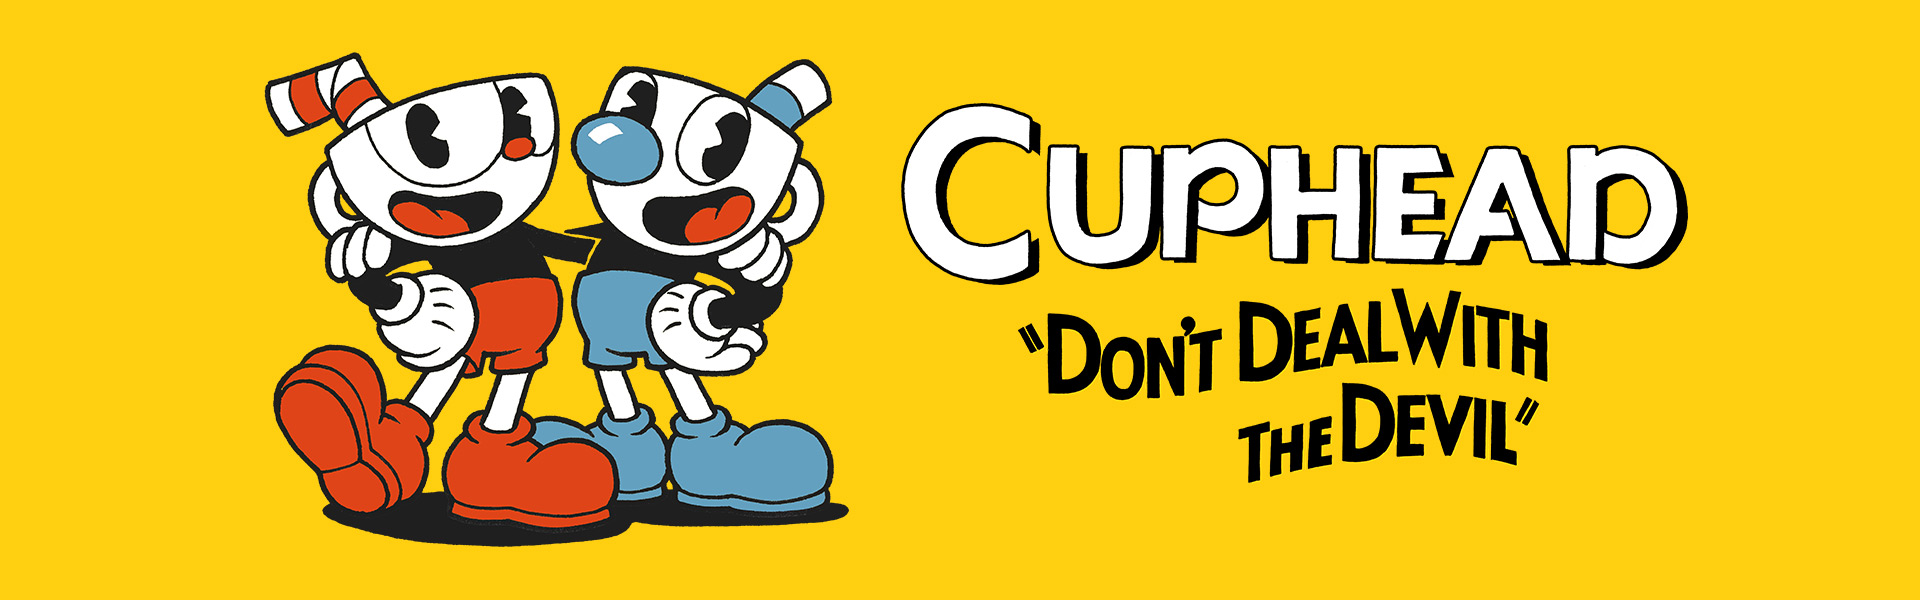 cuphead free download xbox one